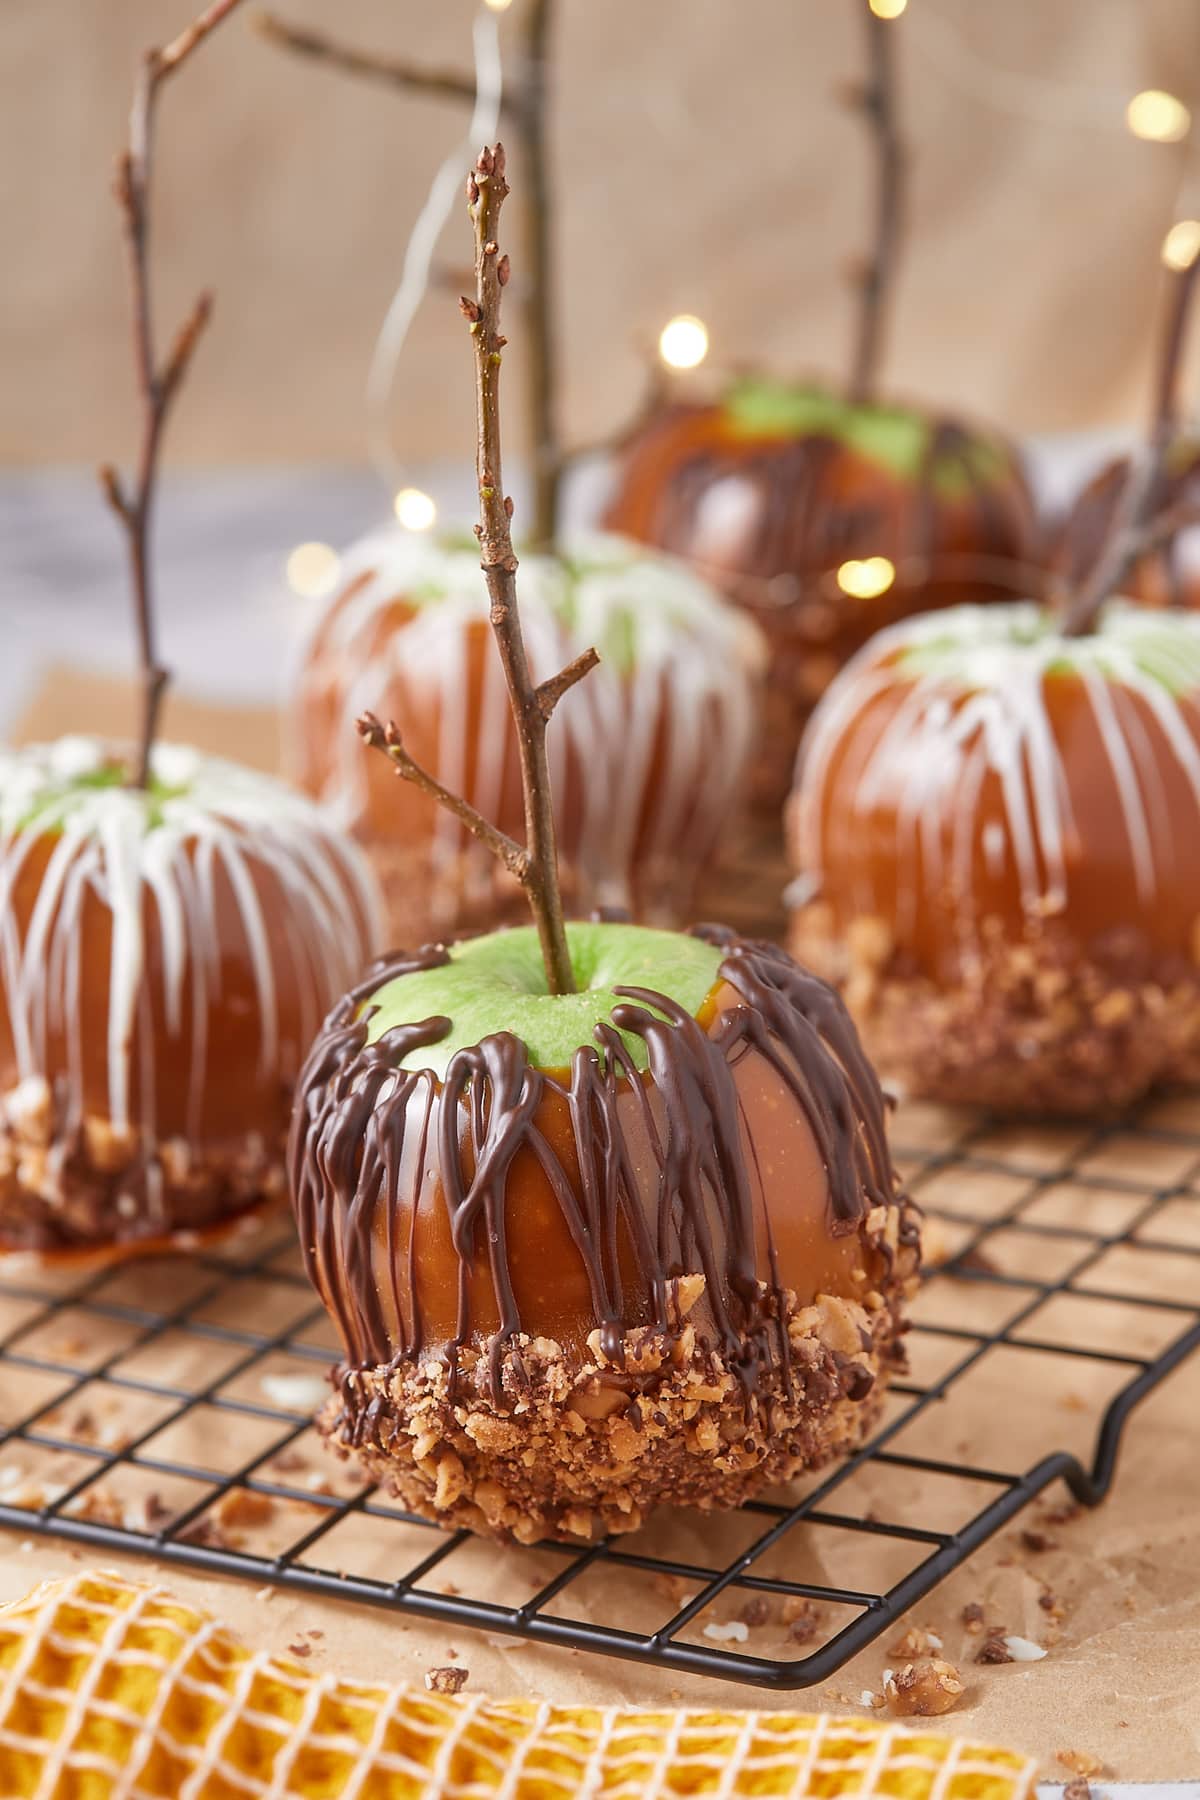 Homemade caramel apples with chocolate on a cooling rack